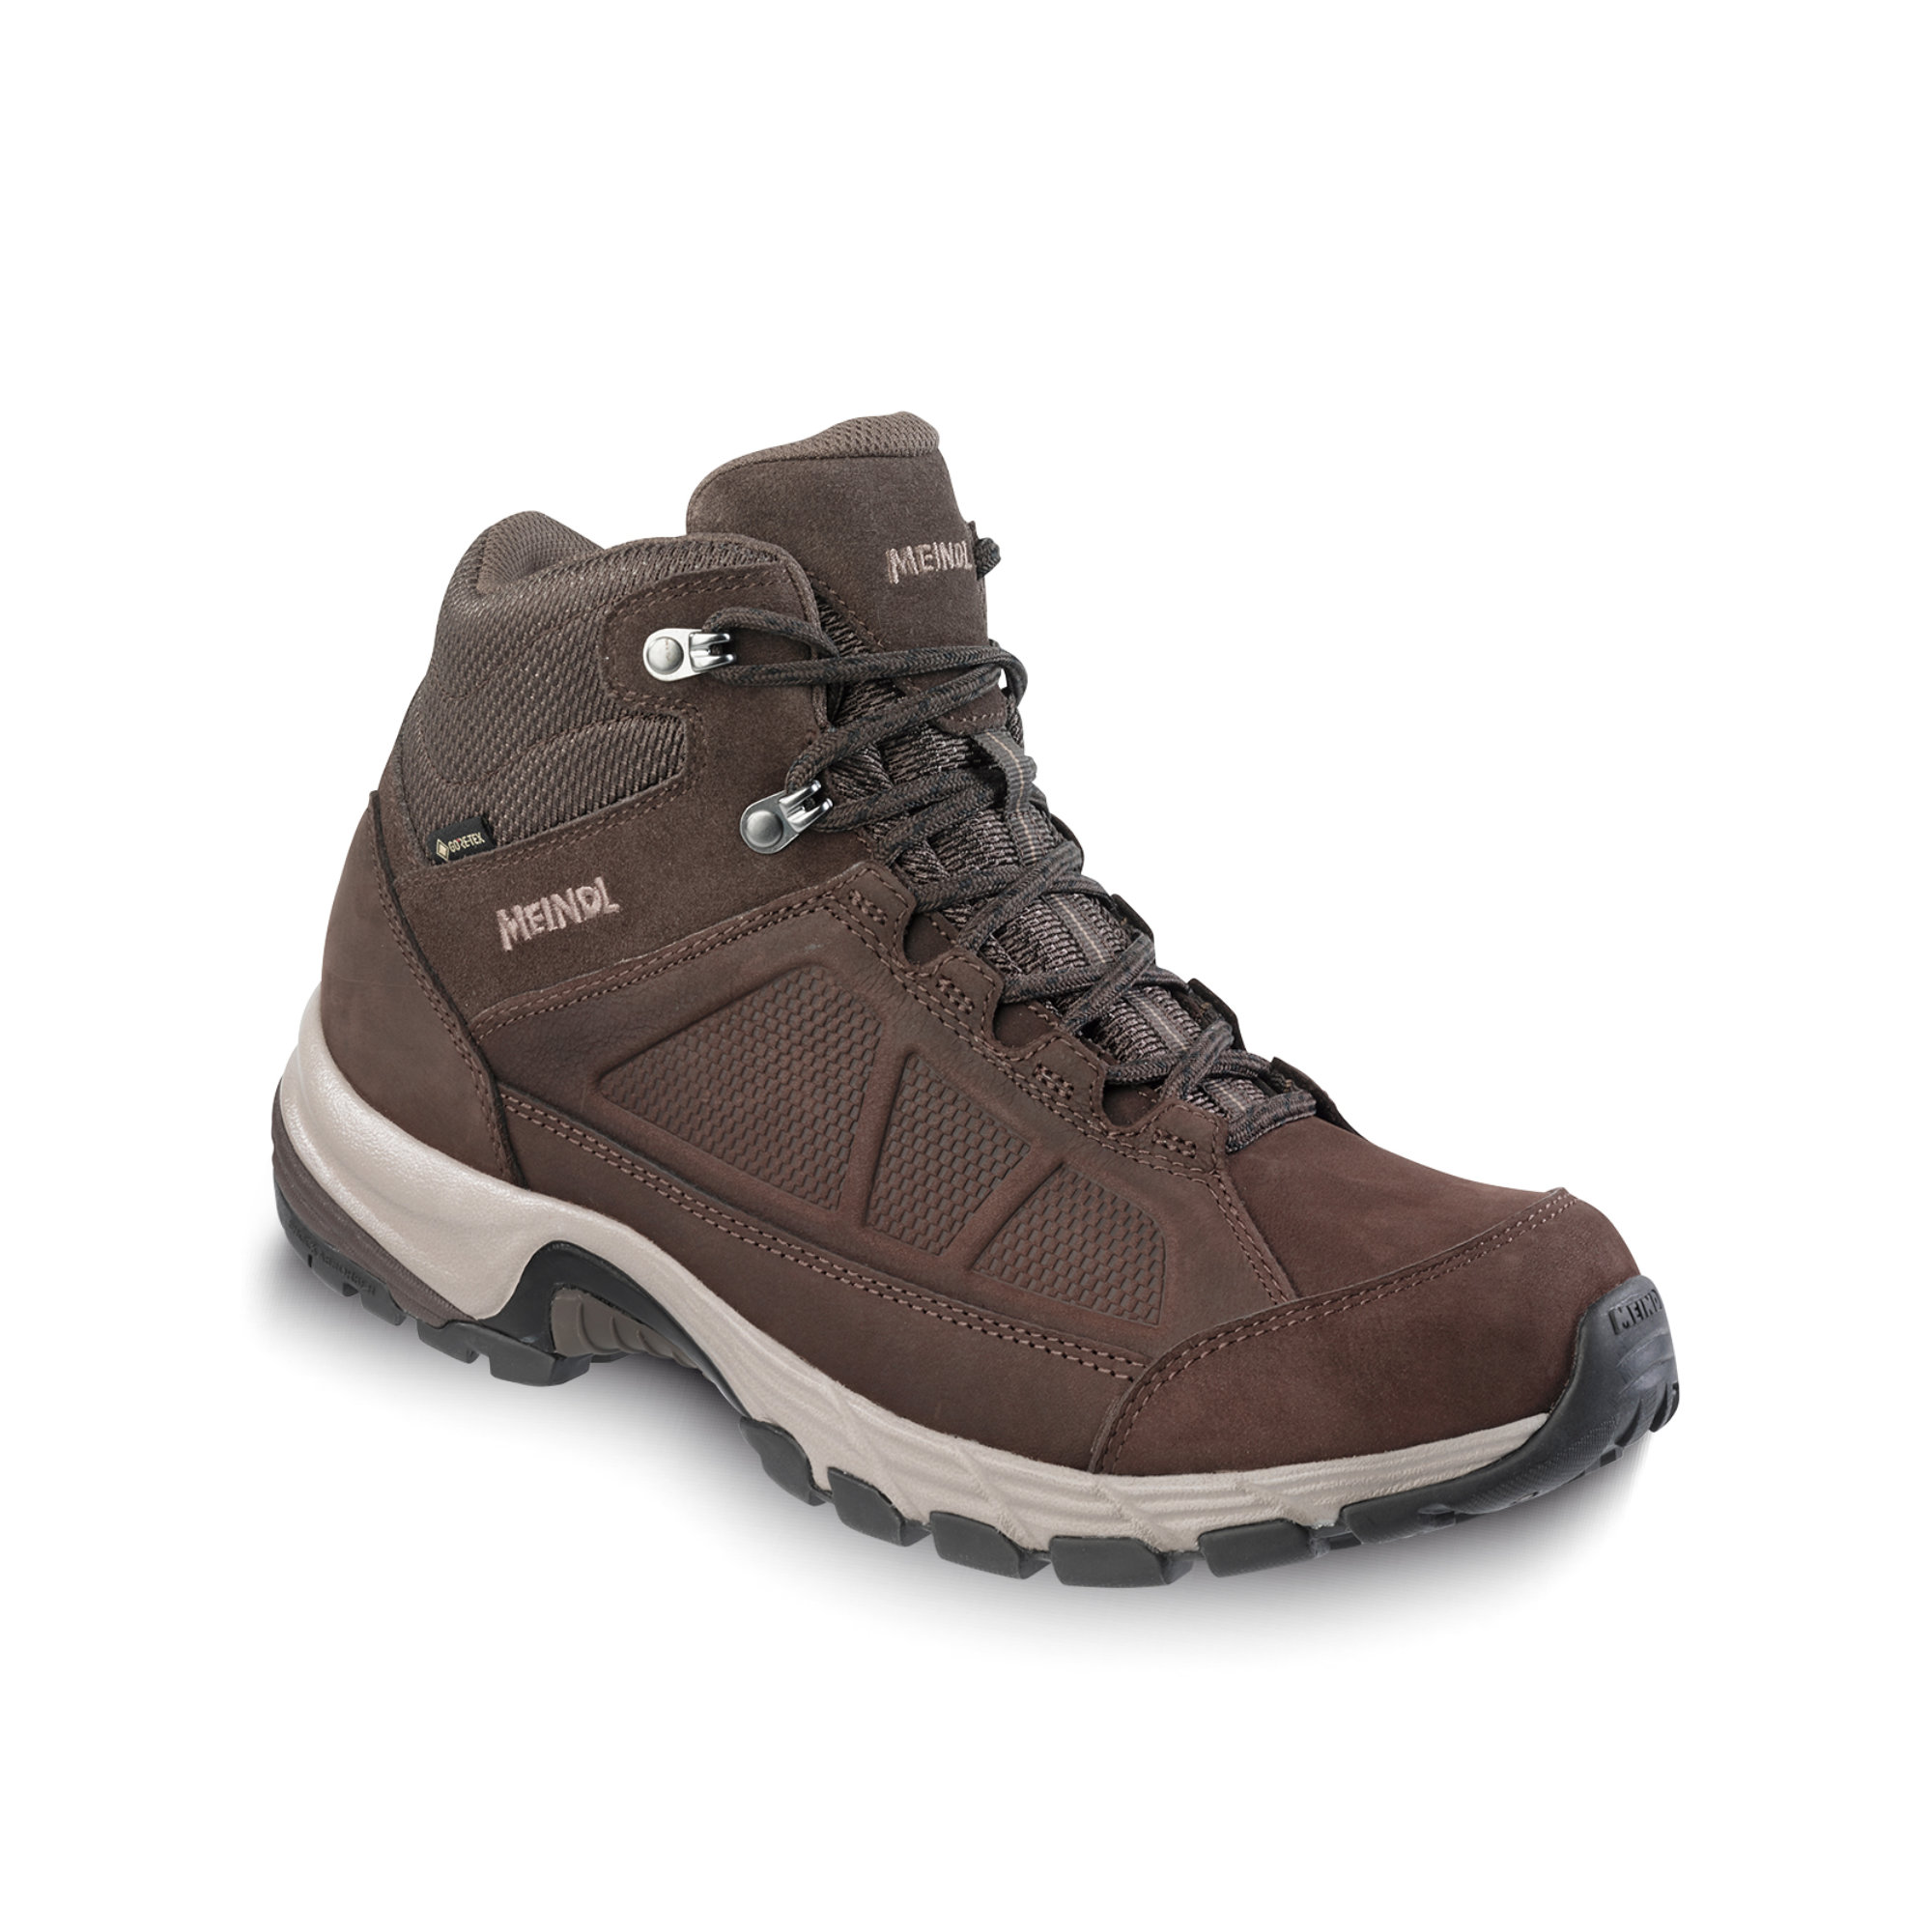 Mens Boots | Quality Hiking Boots | Meindl UK